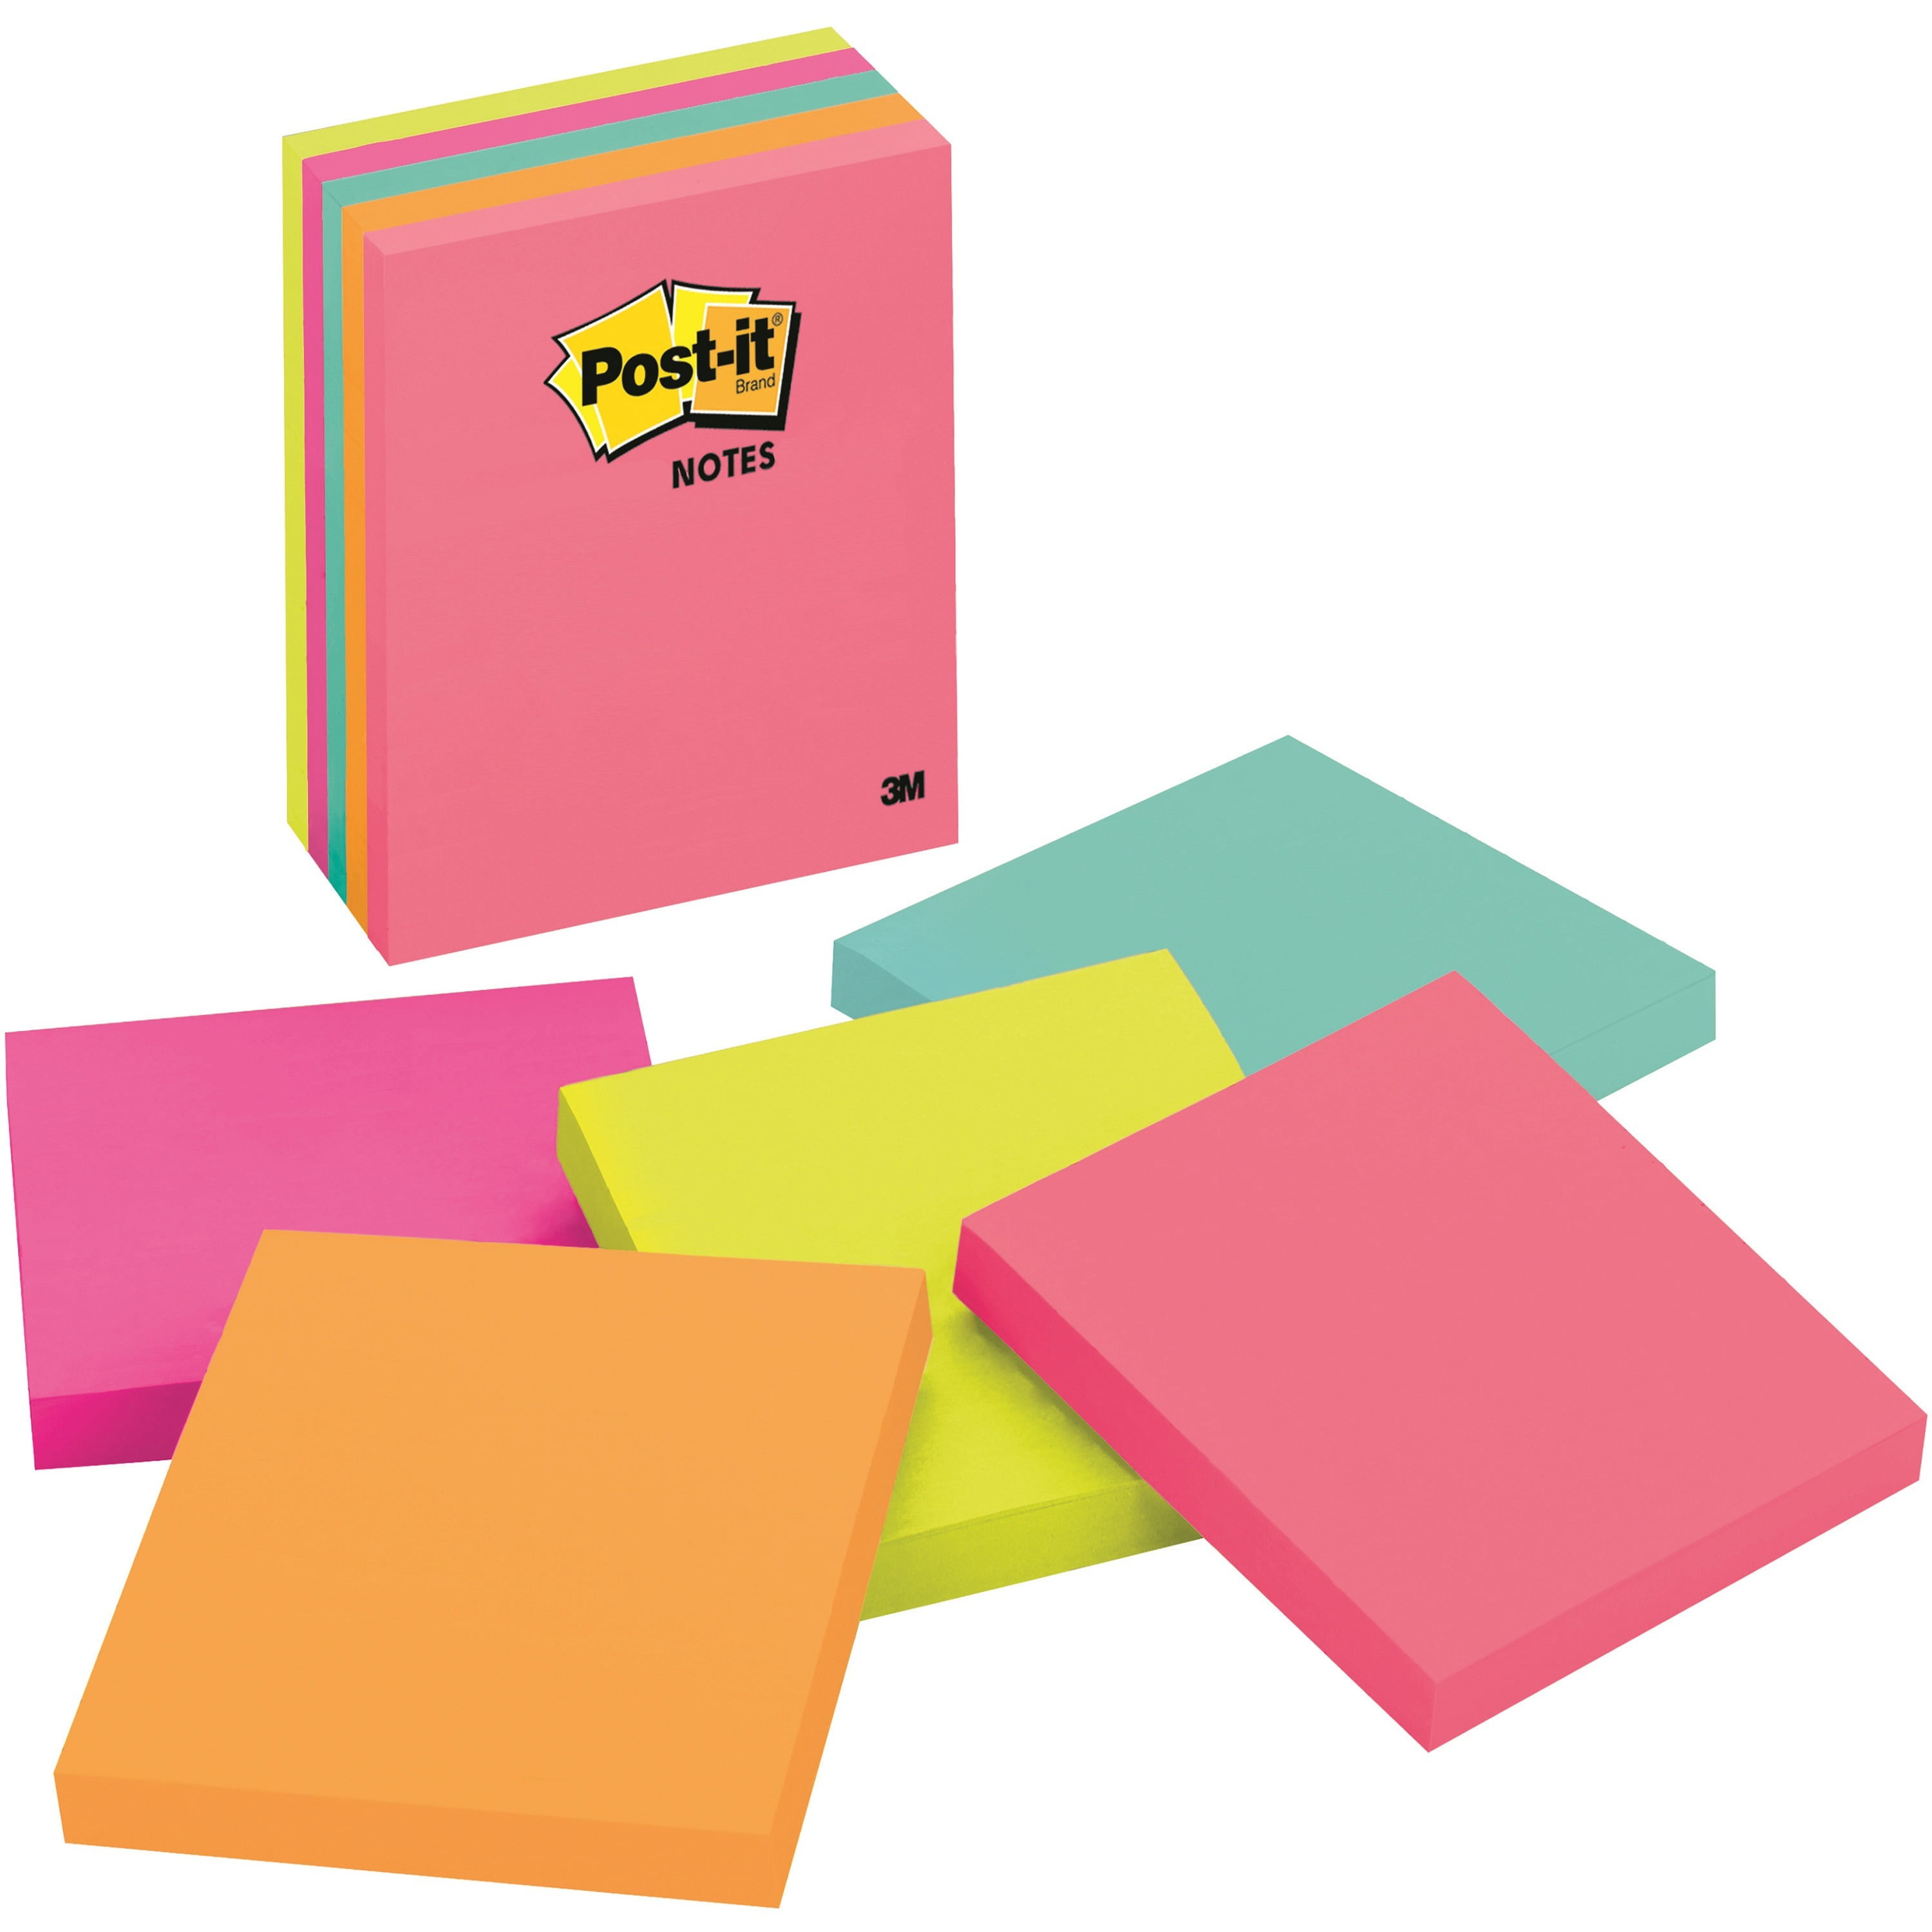 3M Post-it Recycled Notes, 4 x 6, 100 Sheets, Assorted Pastel Colors - 5 pack